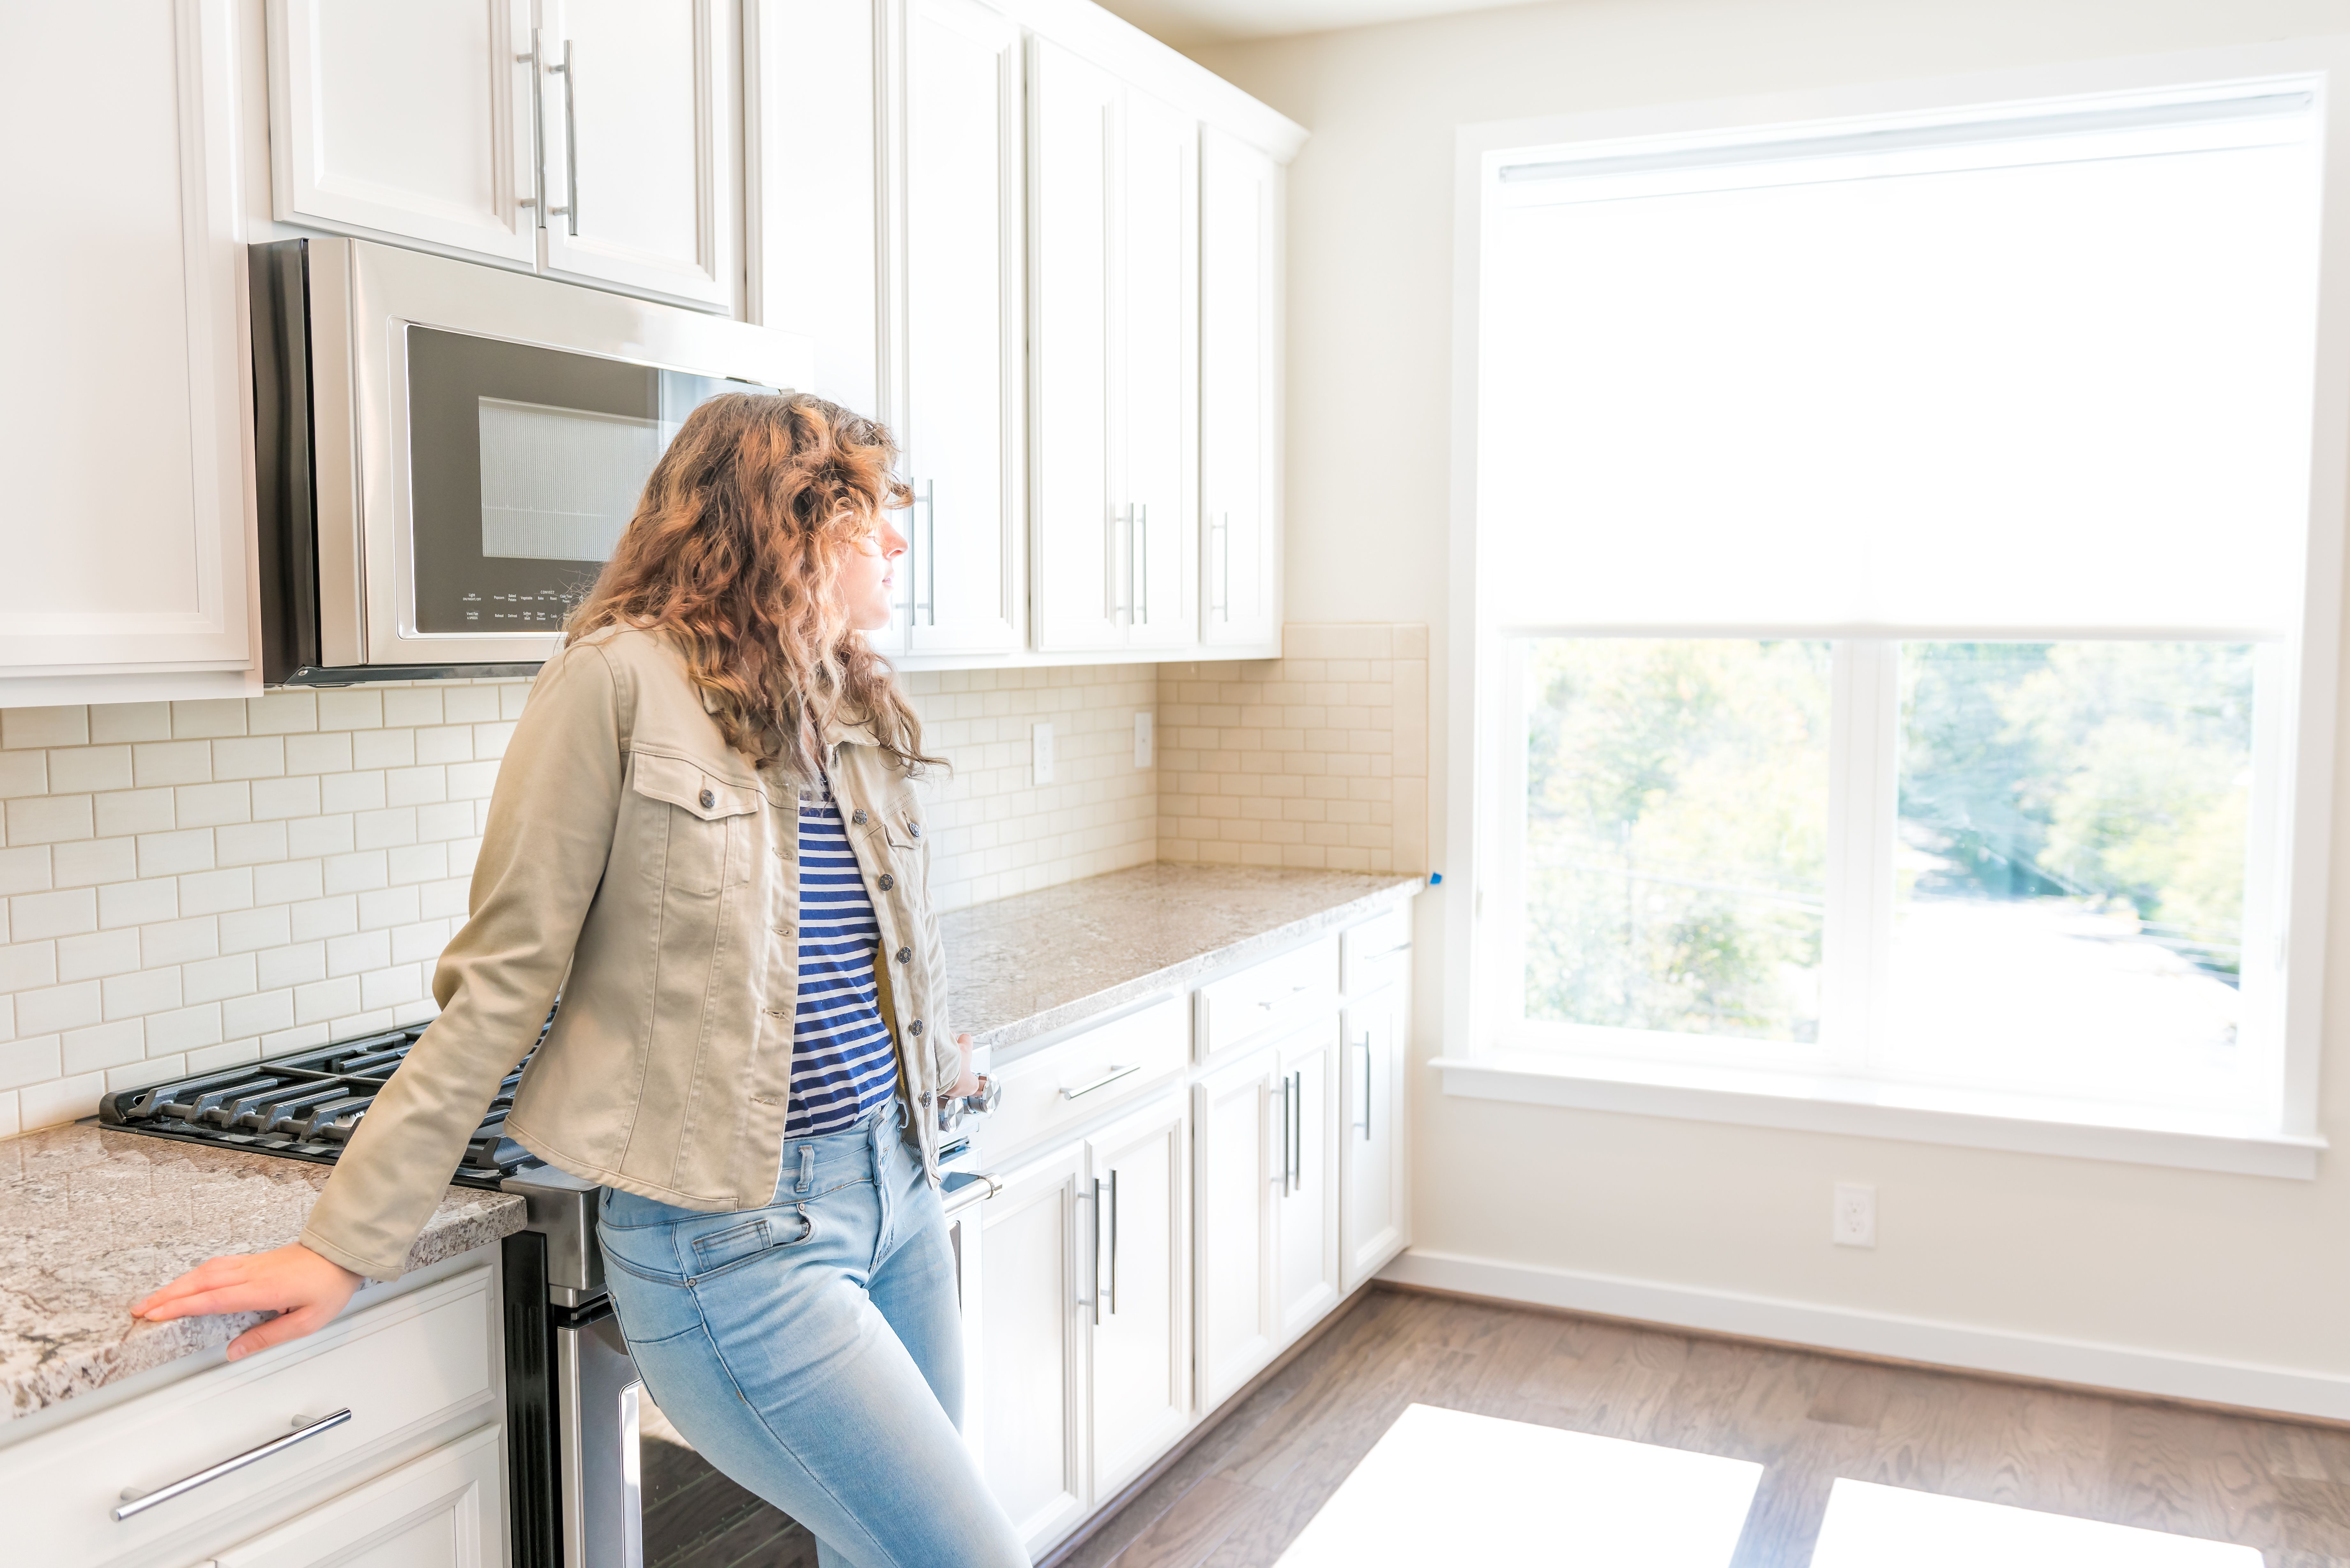 One young woman standing in kitchen in clean, modern, white home design before move-in